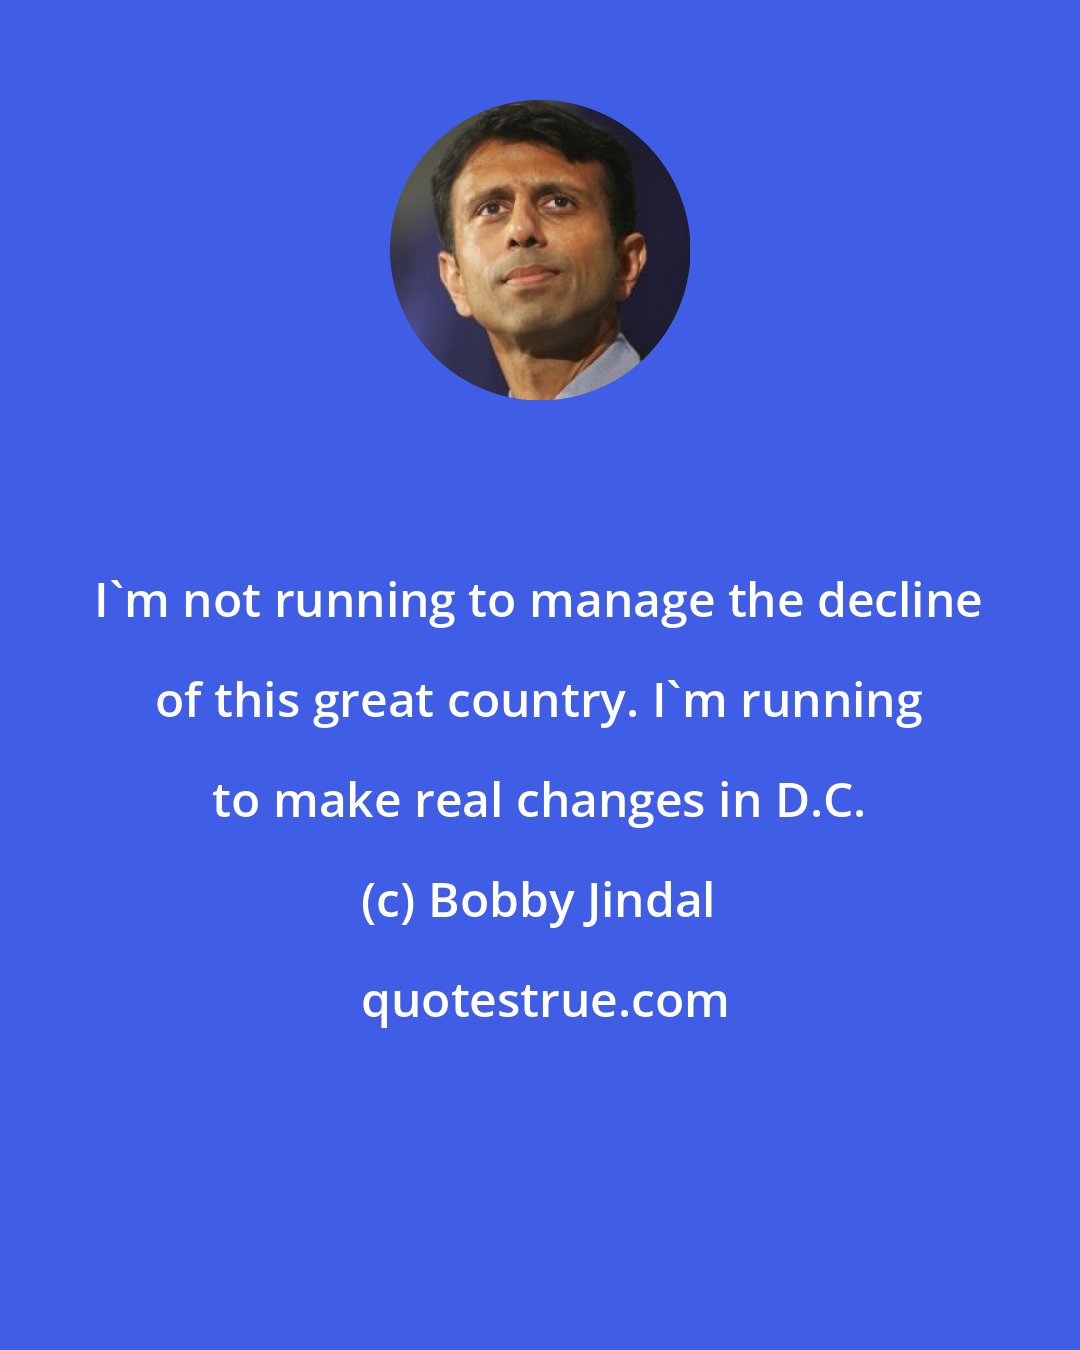 Bobby Jindal: I'm not running to manage the decline of this great country. I'm running to make real changes in D.C.